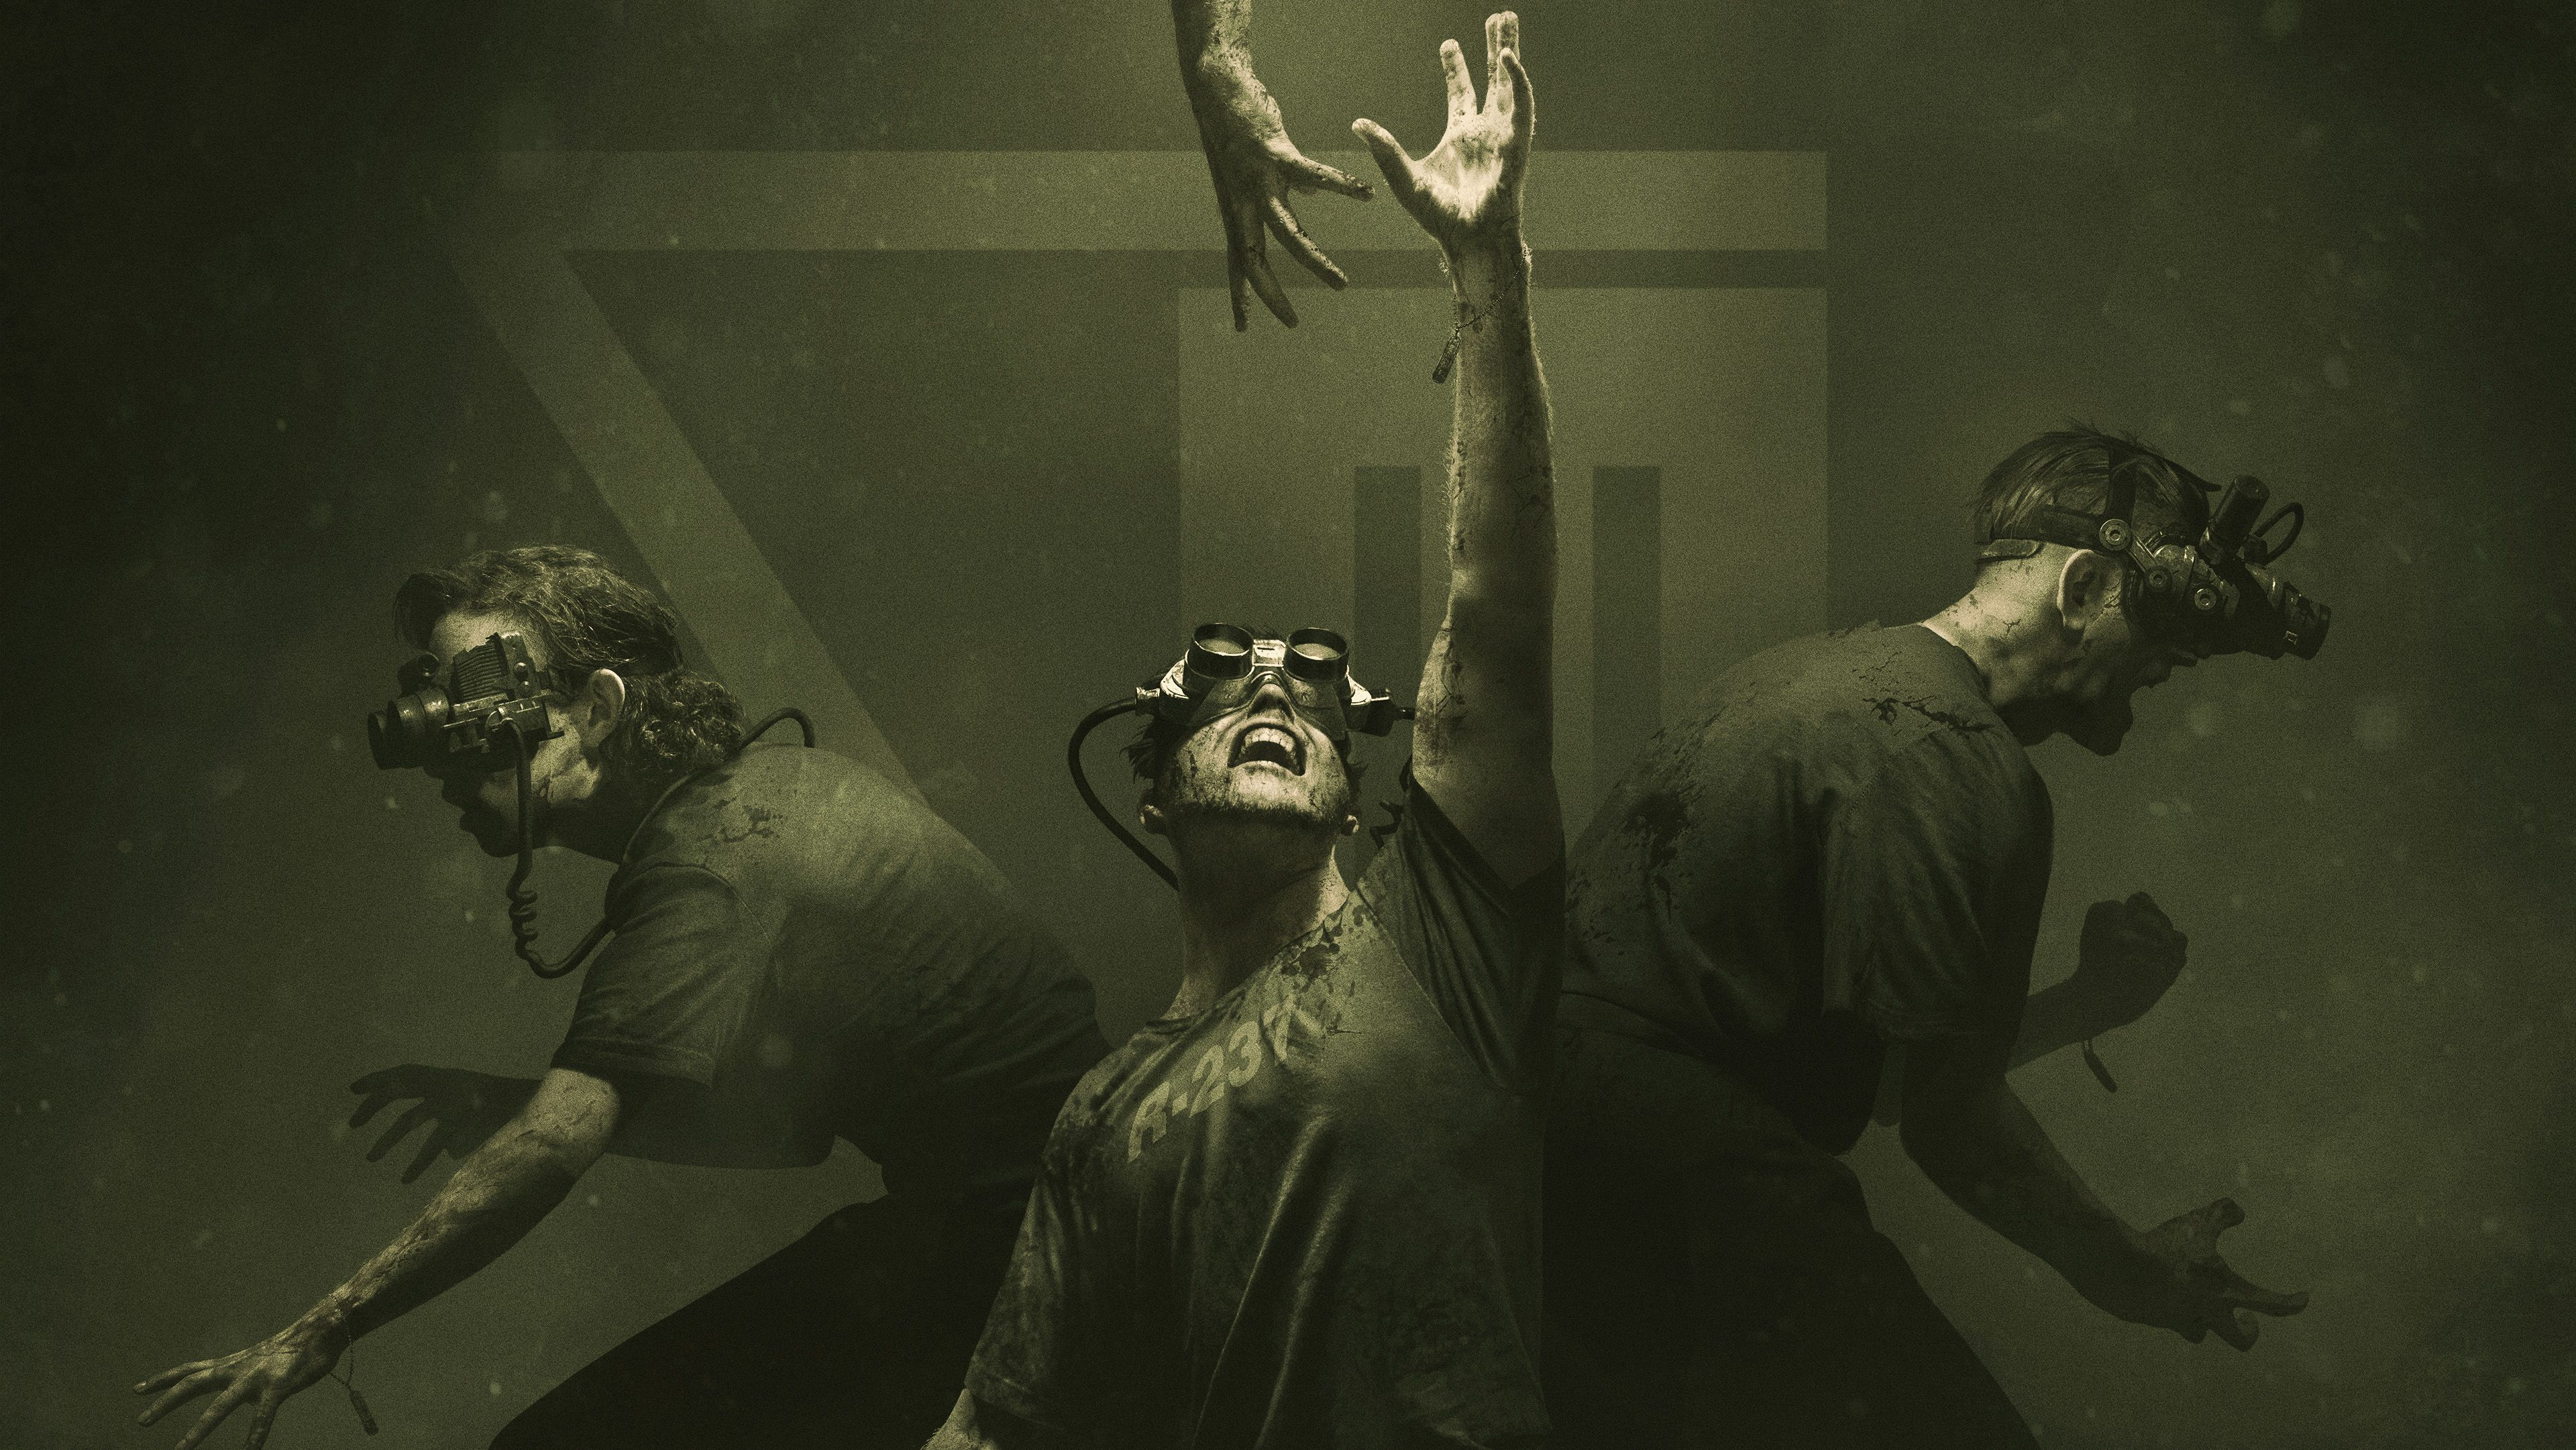 The Outlast Trials is the next game in The Outlast series